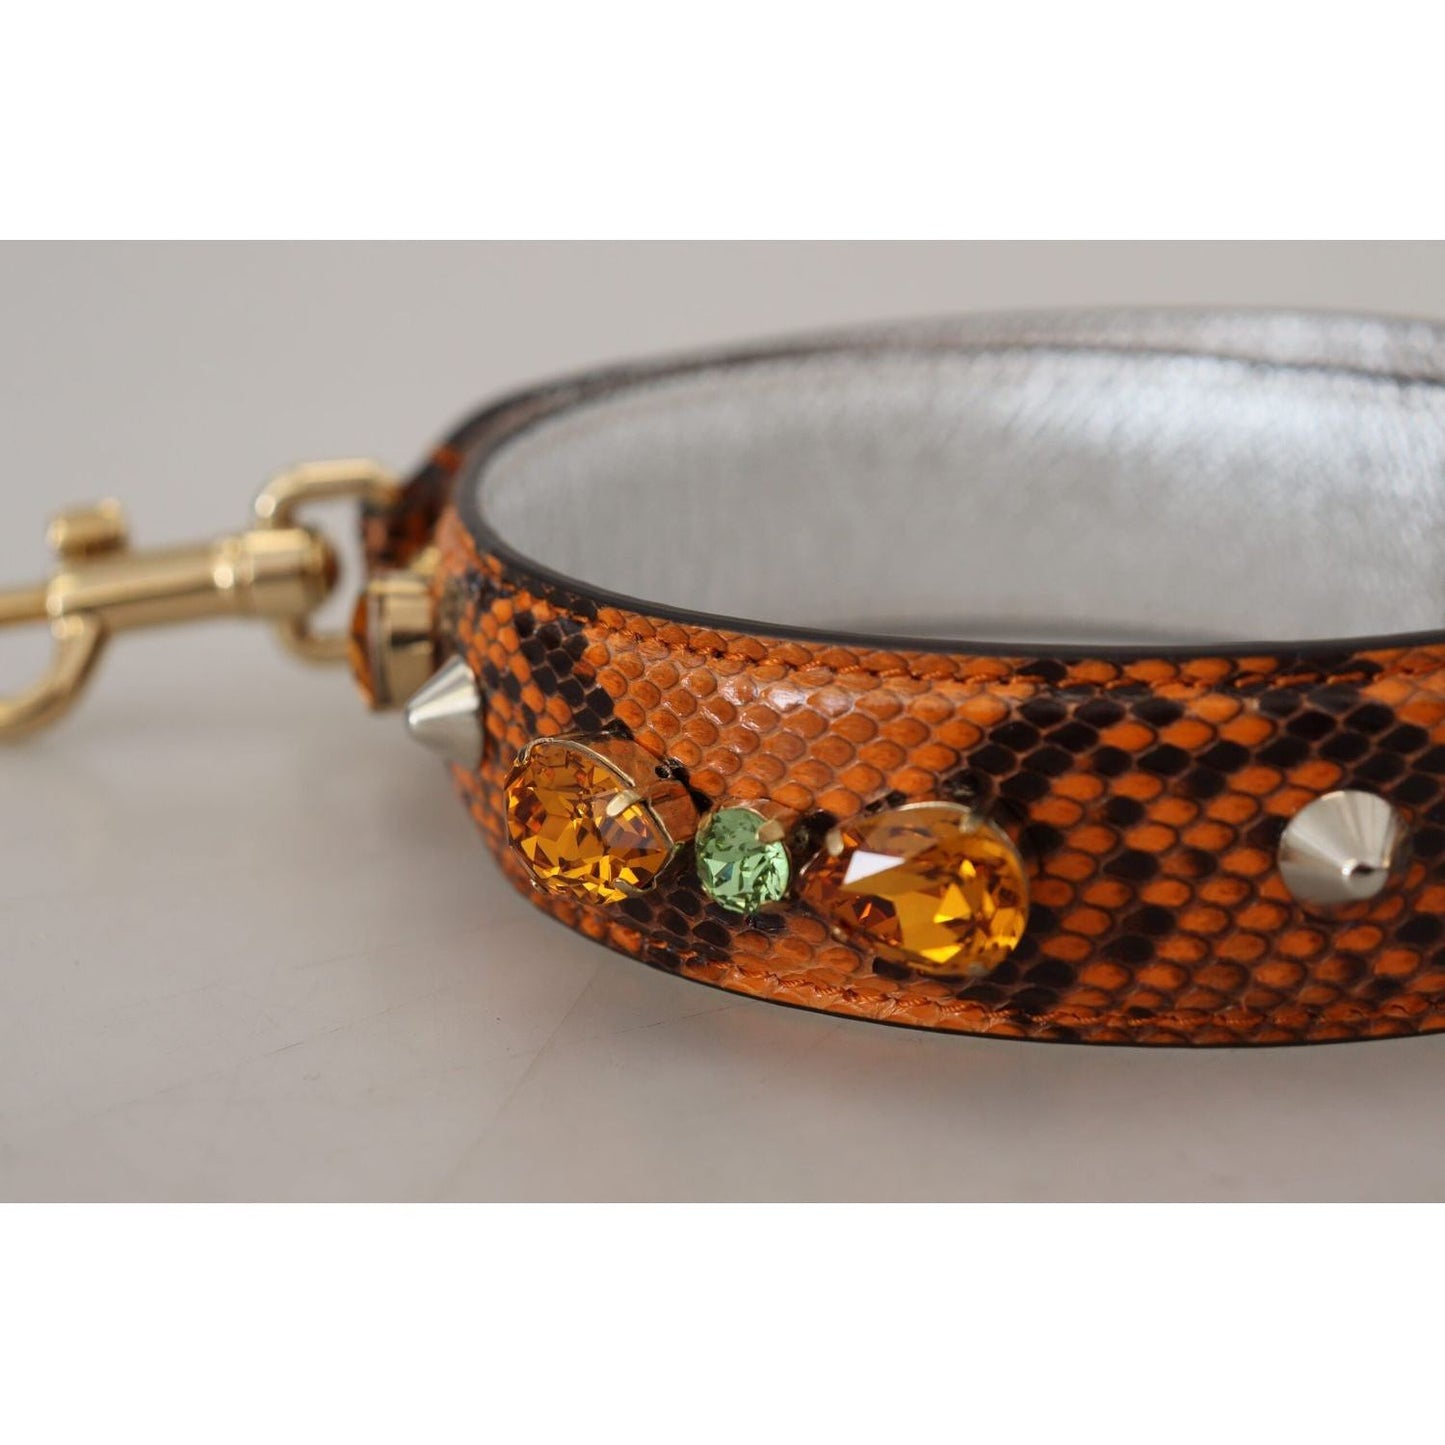 Dolce & Gabbana Chic Orange Leather Bag Strap with Gold-Tone Clasps orange-crystals-leather-bag-accessory-shoulder-strap